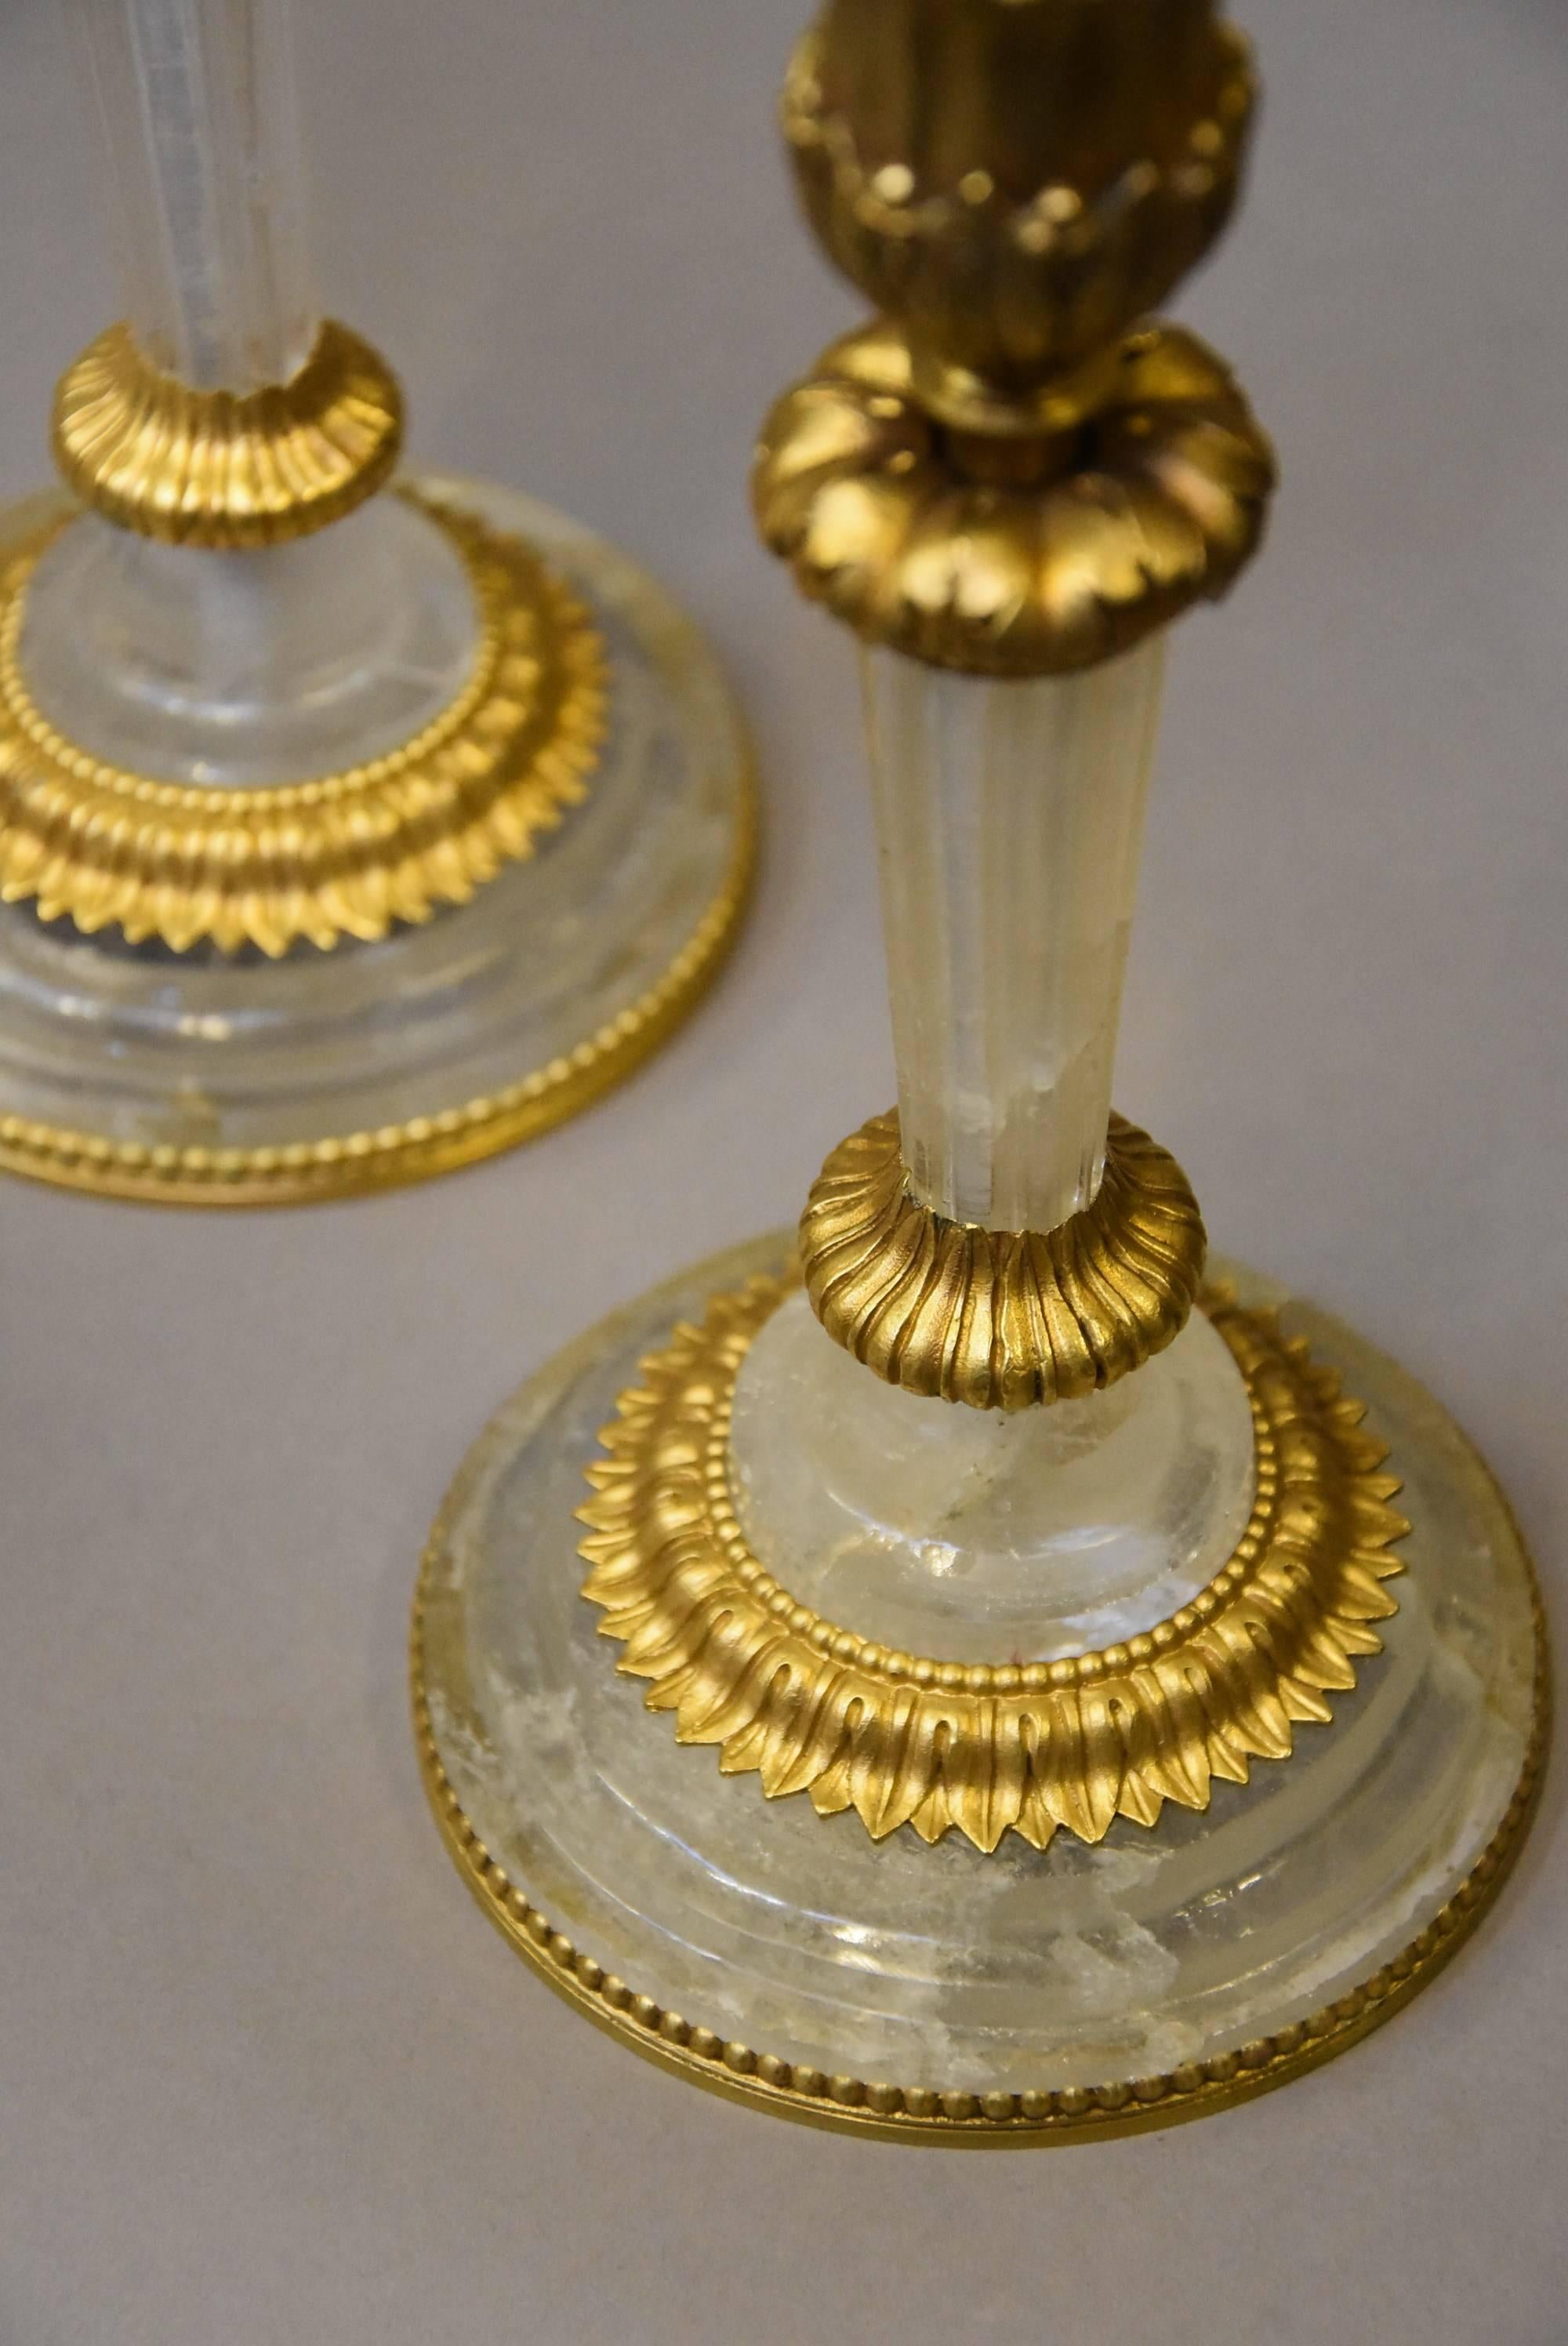 Pair of Elegant Early 20th Century Rock Crystal and Ormolu Candlesticks For Sale 5